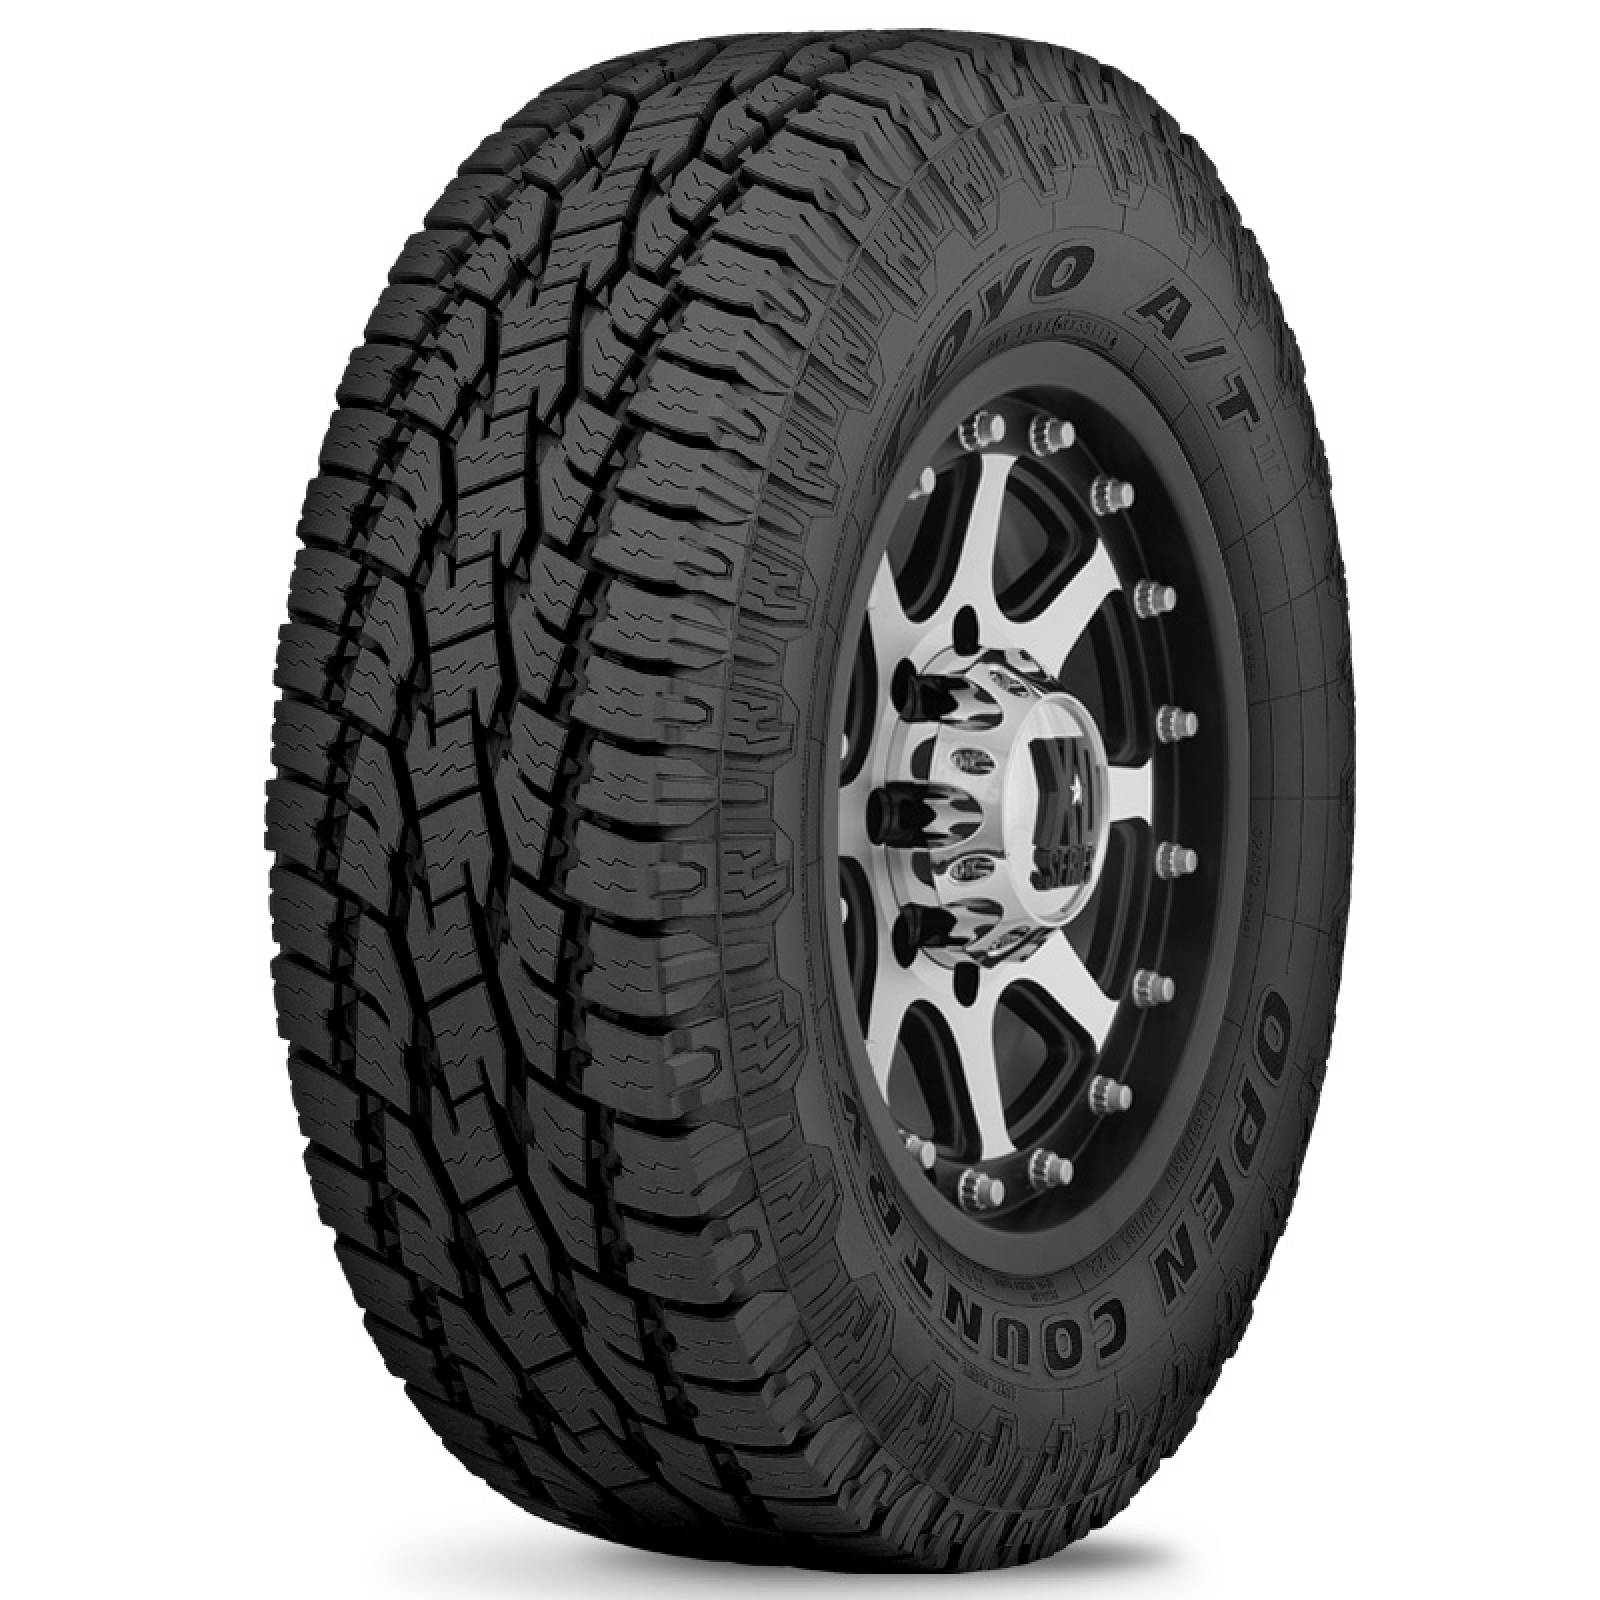 TOYO P265/70R18 OPEN COUNTRY AT2 114S